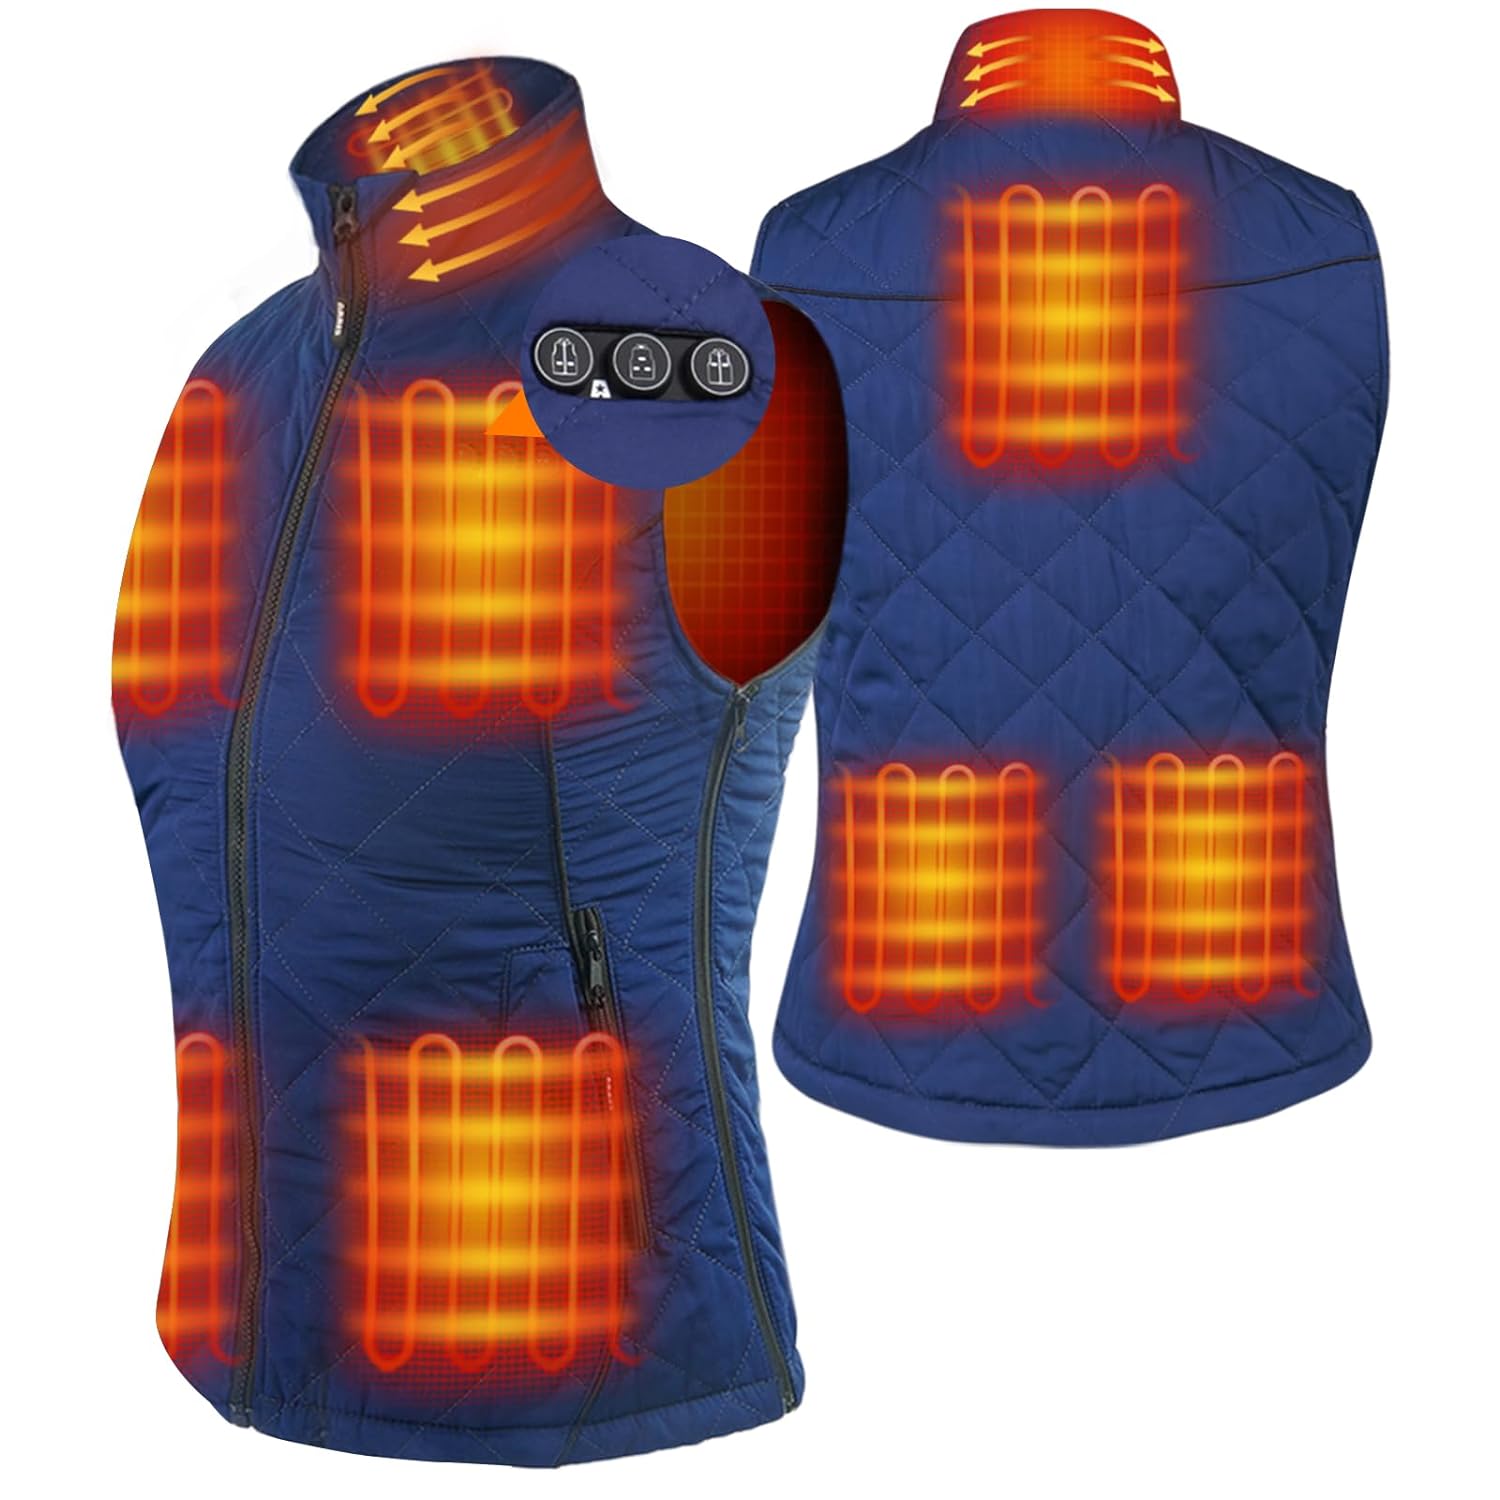 ARRIS Heated Vest for Women, Size Adjustable 7.4V Electric Warm Vest 8 Heating Panels with Battery Pack